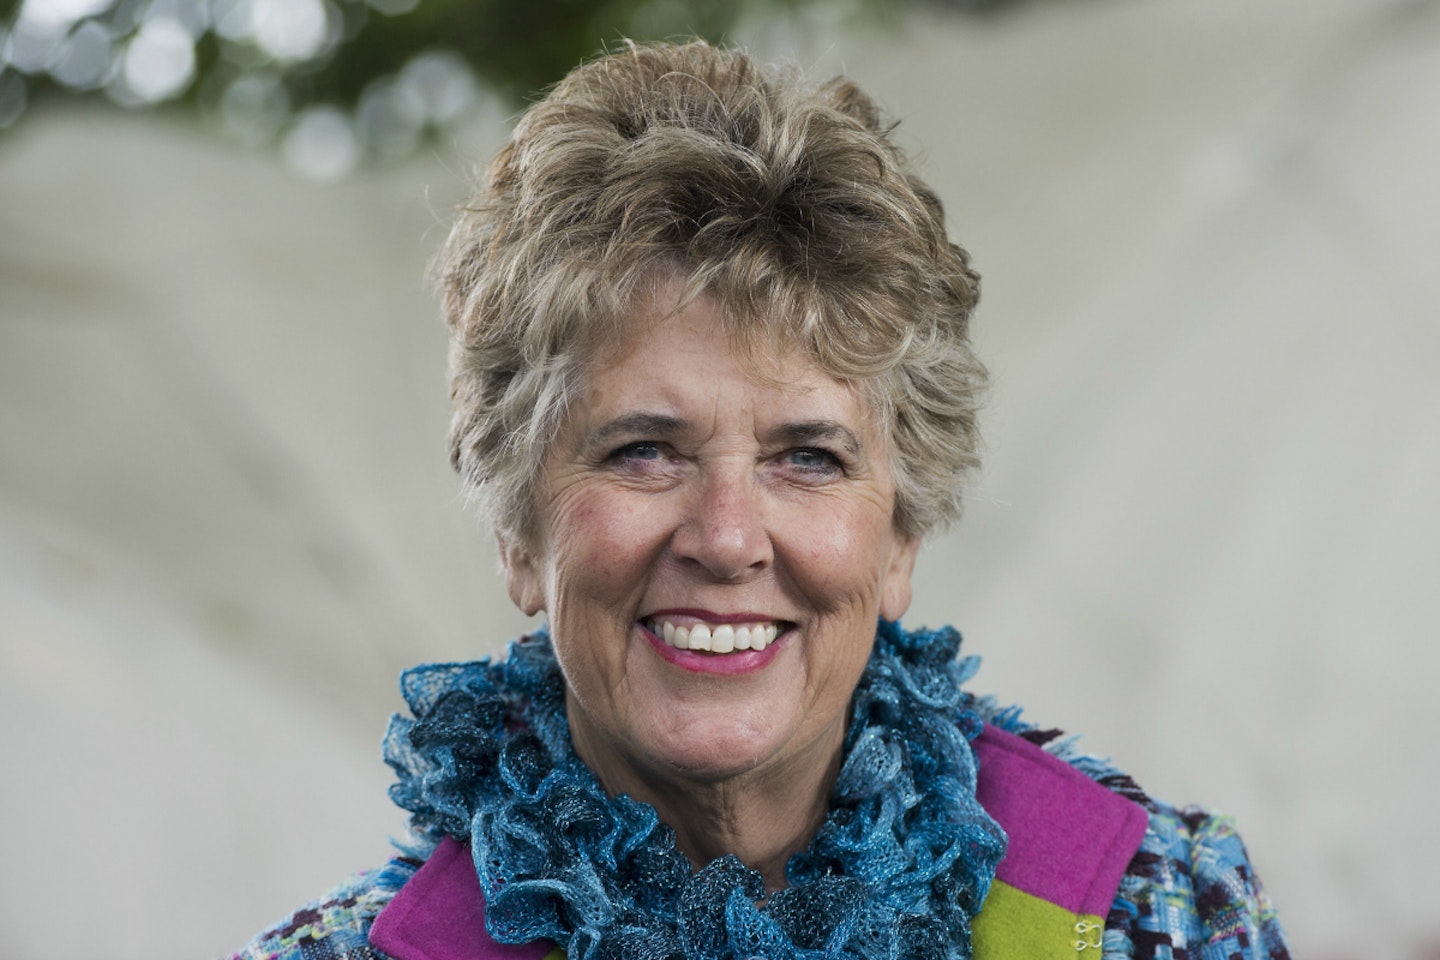 prue-leith-replacing-mary-berry-great-british-bake-off-judge-gbbo